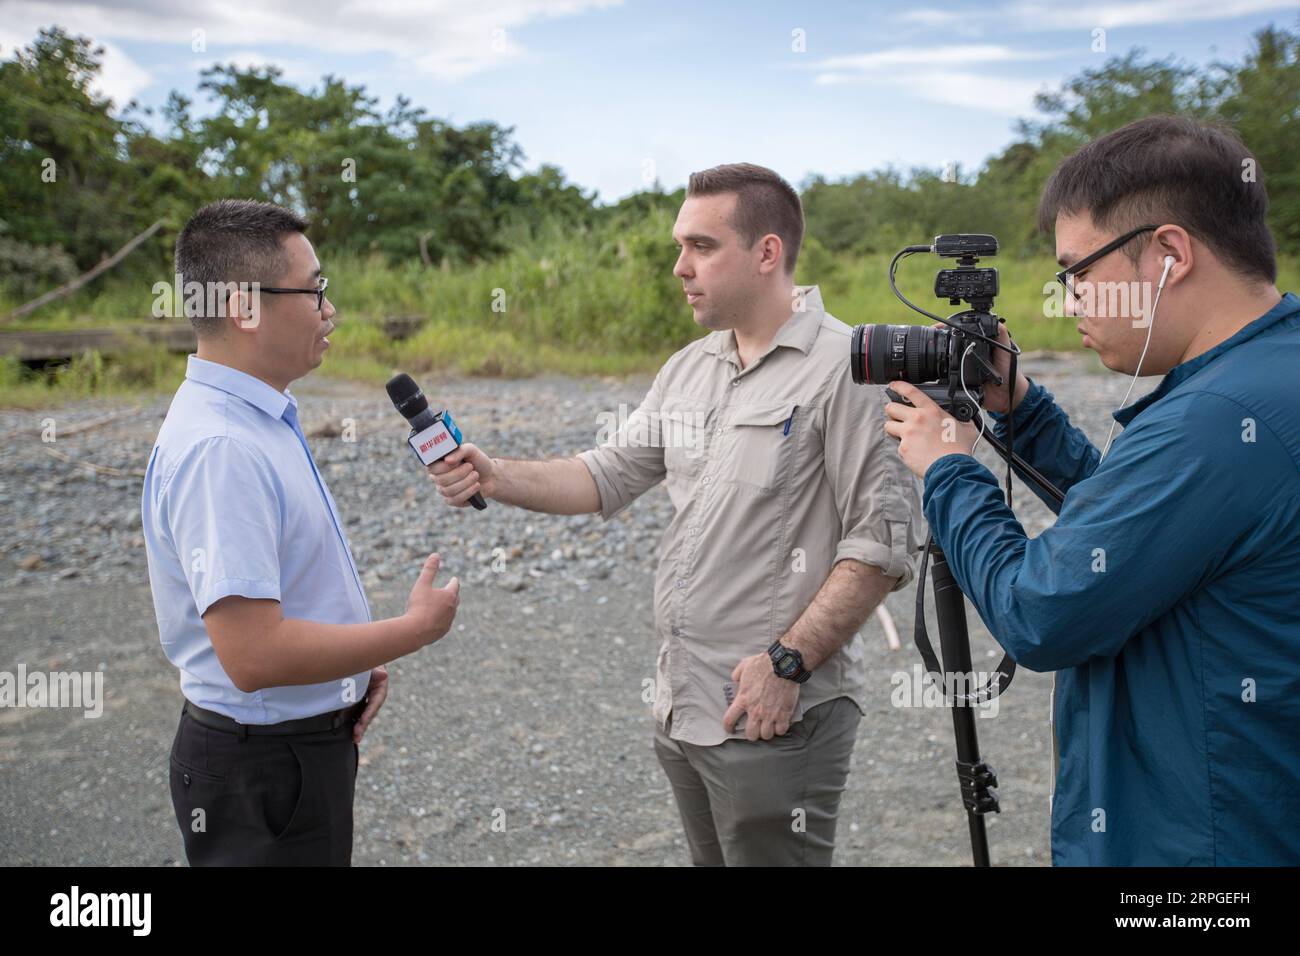 191013 -- HONIARA, Oct. 13, 2019 -- Yuan Huiming, regional project manager of the China Harbour Engineering Company CHEC, speaks during an interview with Xinhua in Honiara, Solomon Islands, Oct. 10, 2019. TO GO WITH Feature: Infrastructure projects set stage for diplomatic ties between China, Solomon Islands Photo by /Xinhua SOLOMON ISLANDS-HONIARA-CHINA-INFRASTRUCTURE ZhuxHongye PUBLICATIONxNOTxINxCHN Stock Photo